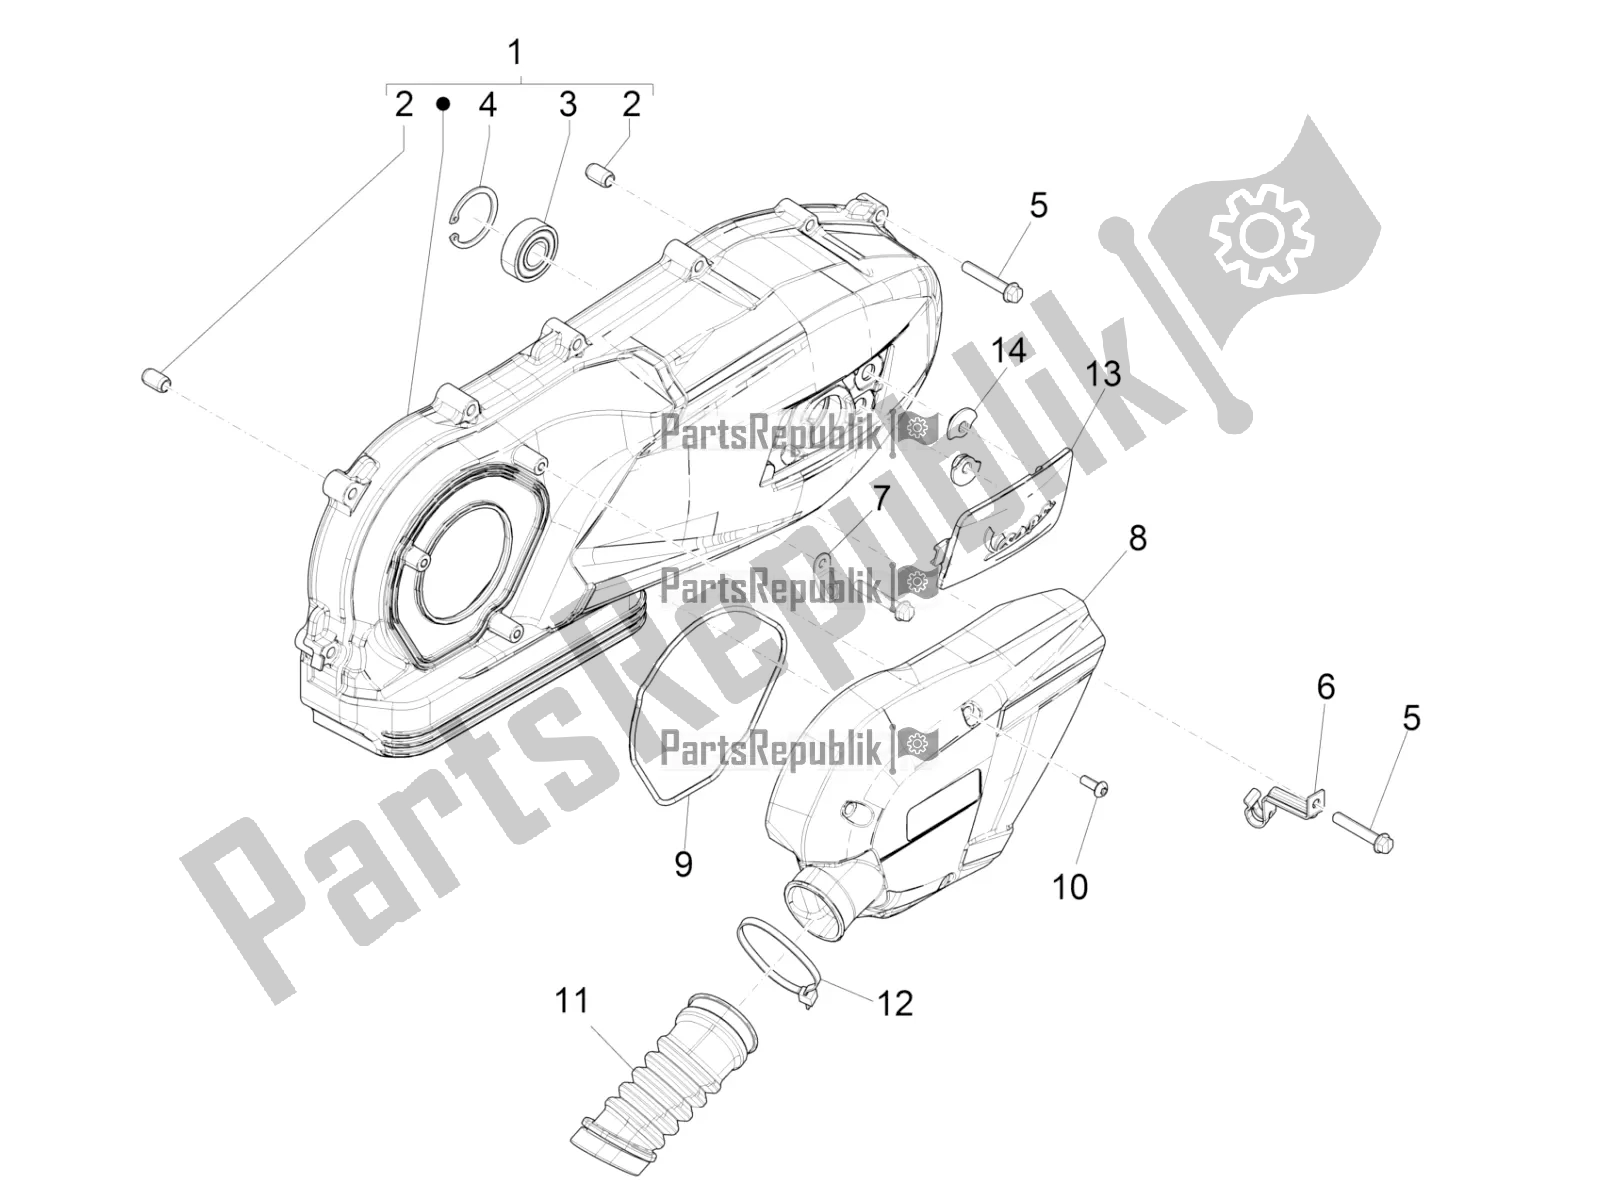 All parts for the Crankcase Cover - Crankcase Cooling of the Vespa Sprint 150 Iget 2019